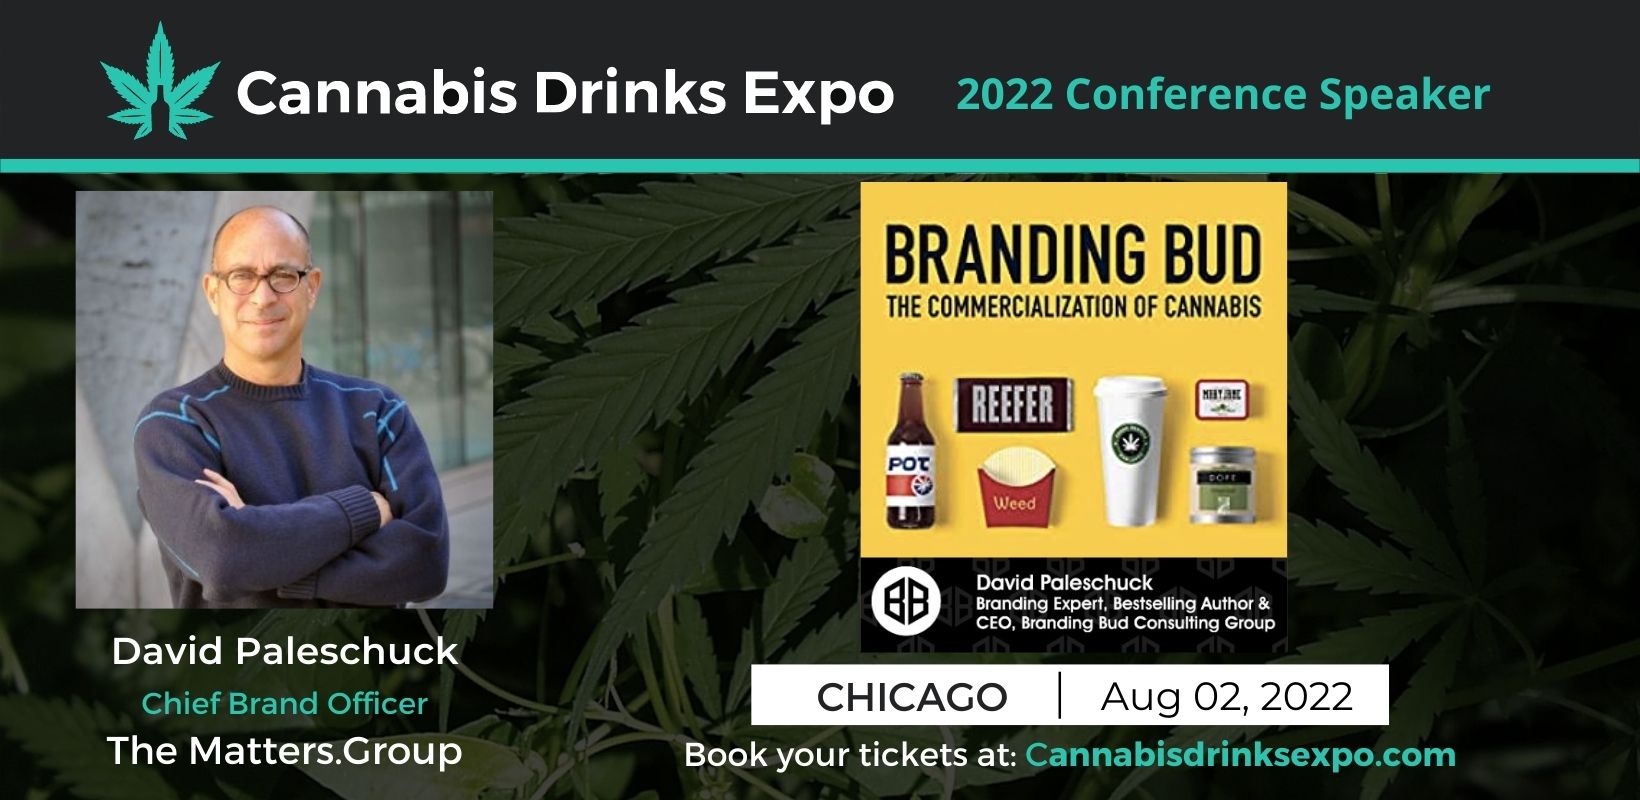 Photo for: David Paleschuck, Cannabis Branding, CPG Branding Expert, Consultant, & Author to speak at CDE 2022.